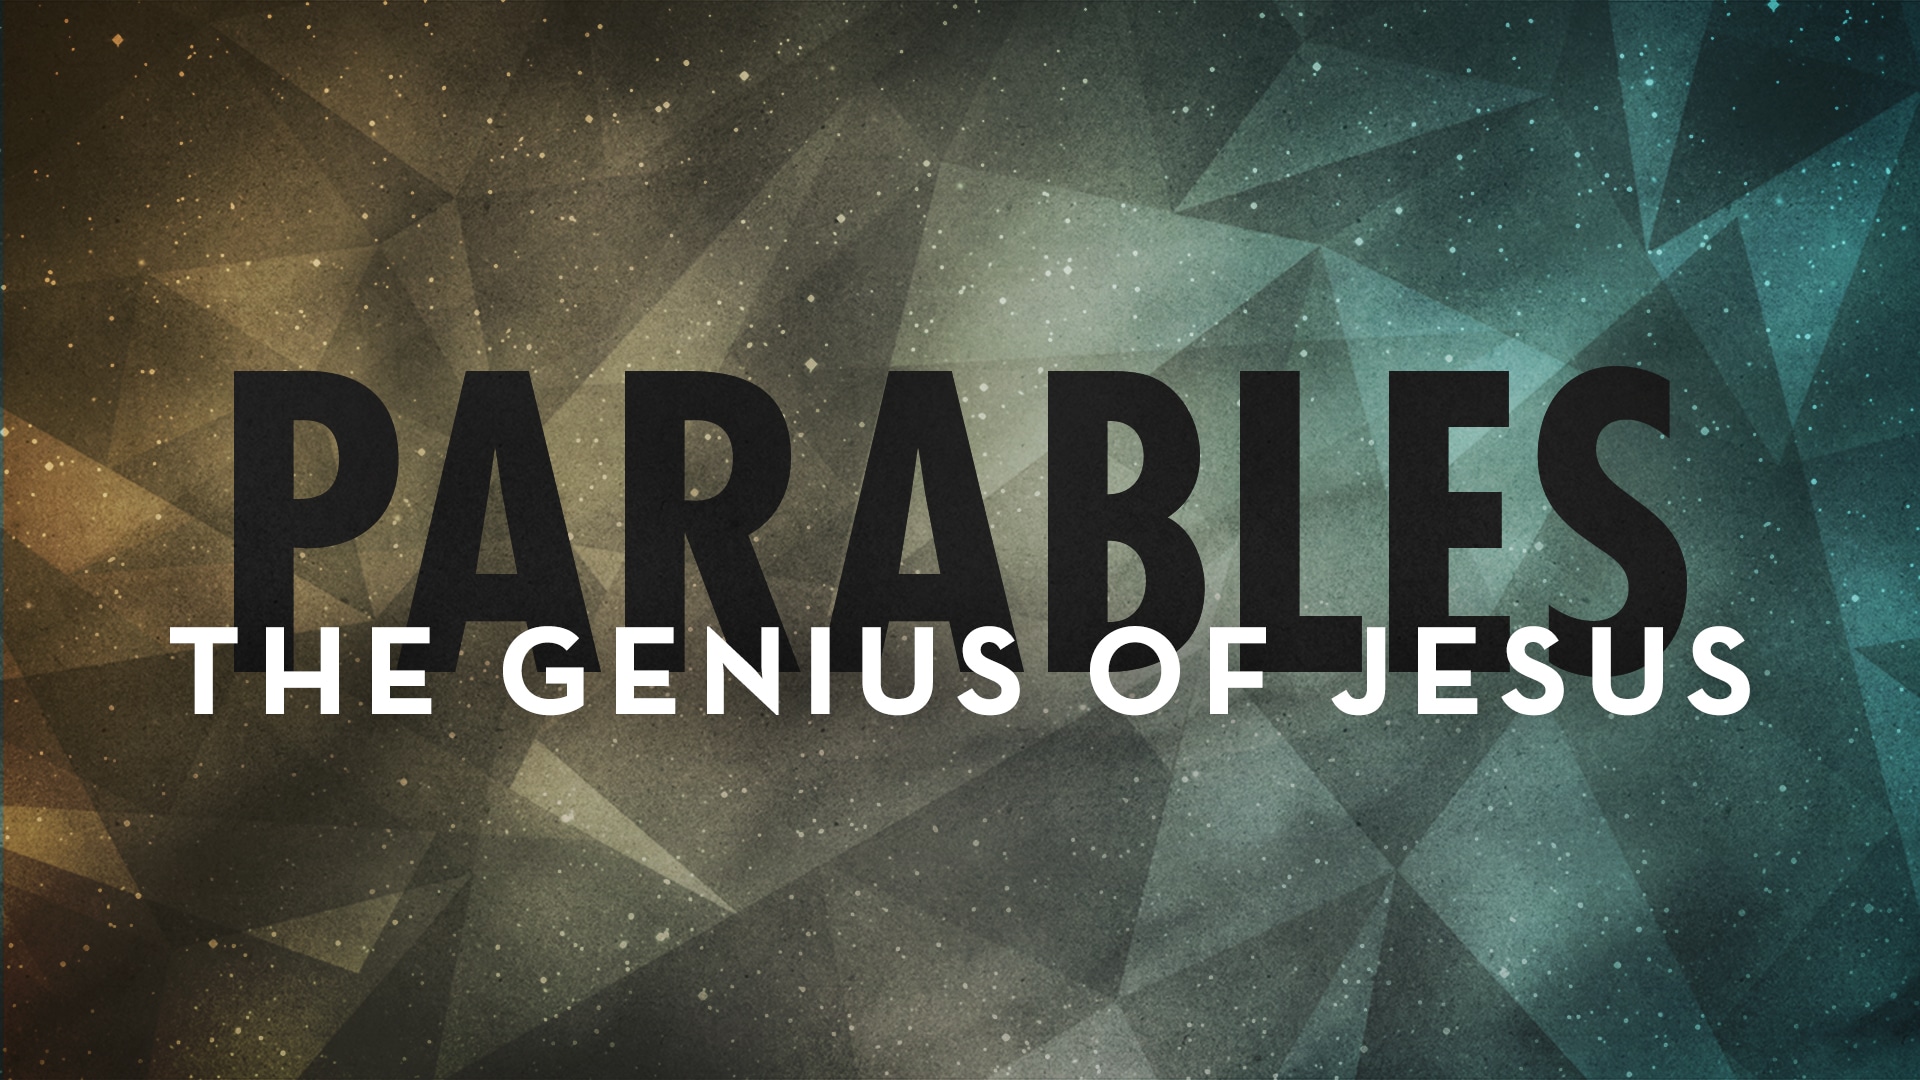 Featured image for “Parables: The Genius of Jesus”